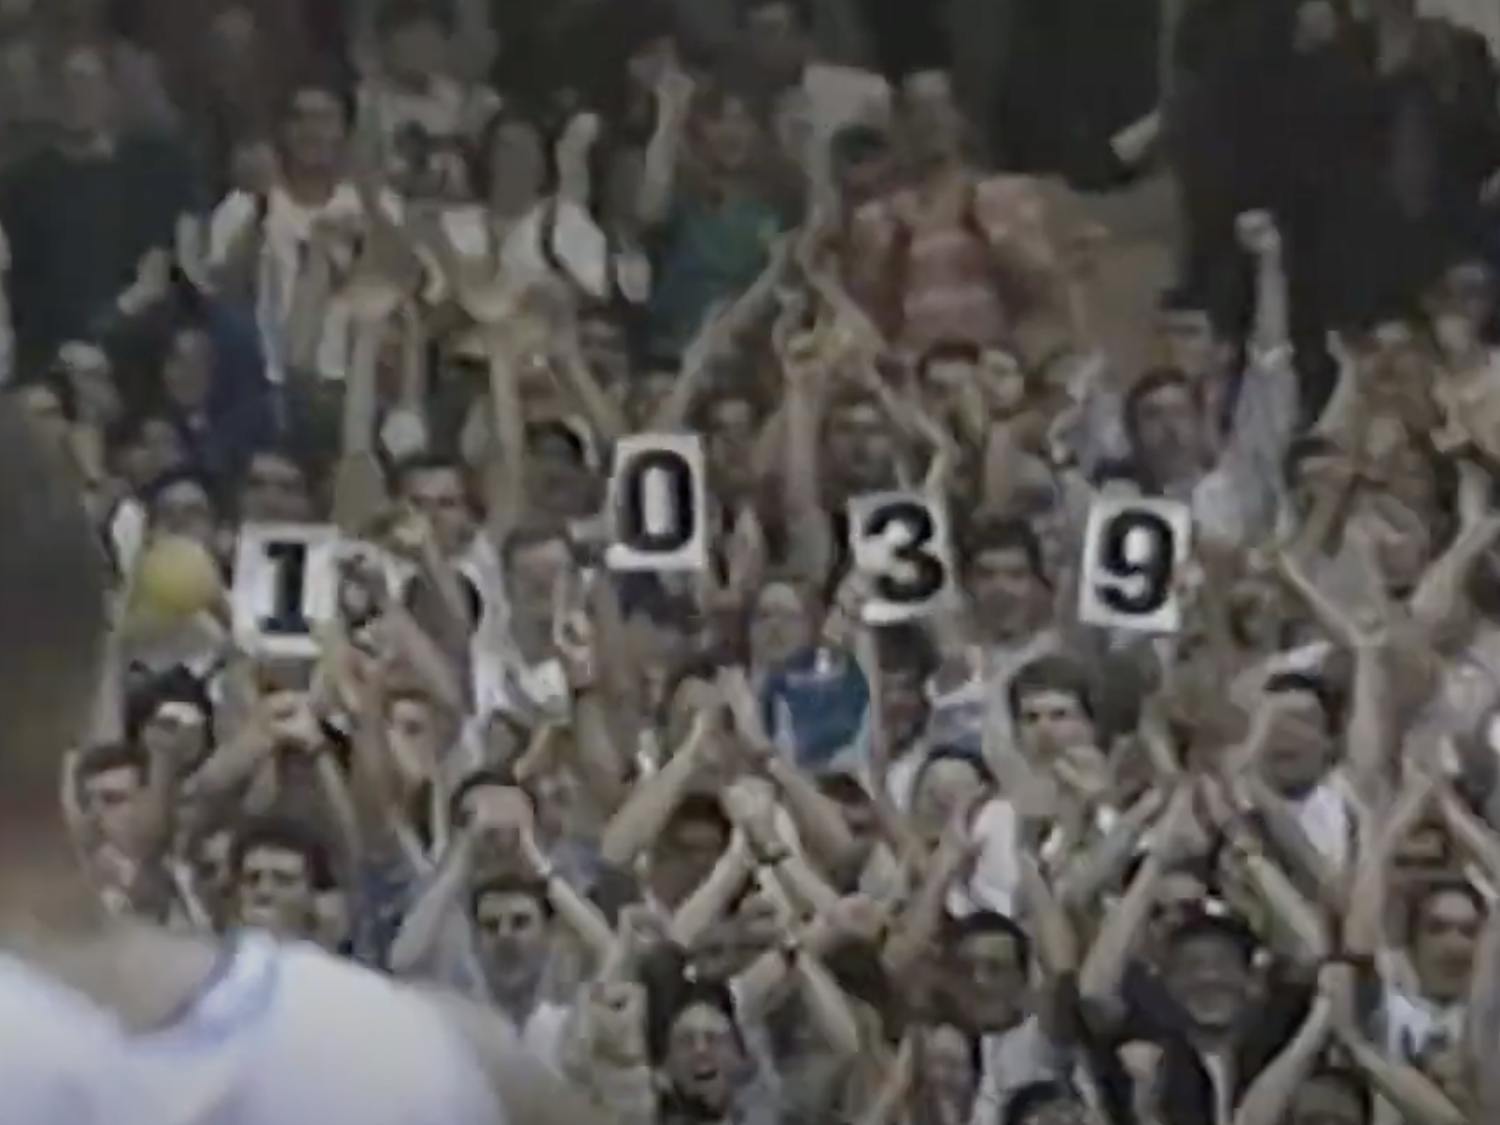 Mark Weinberg and his friends count Bobby Hurley's all-time assists at Duke's home game against Maryland in 1993.